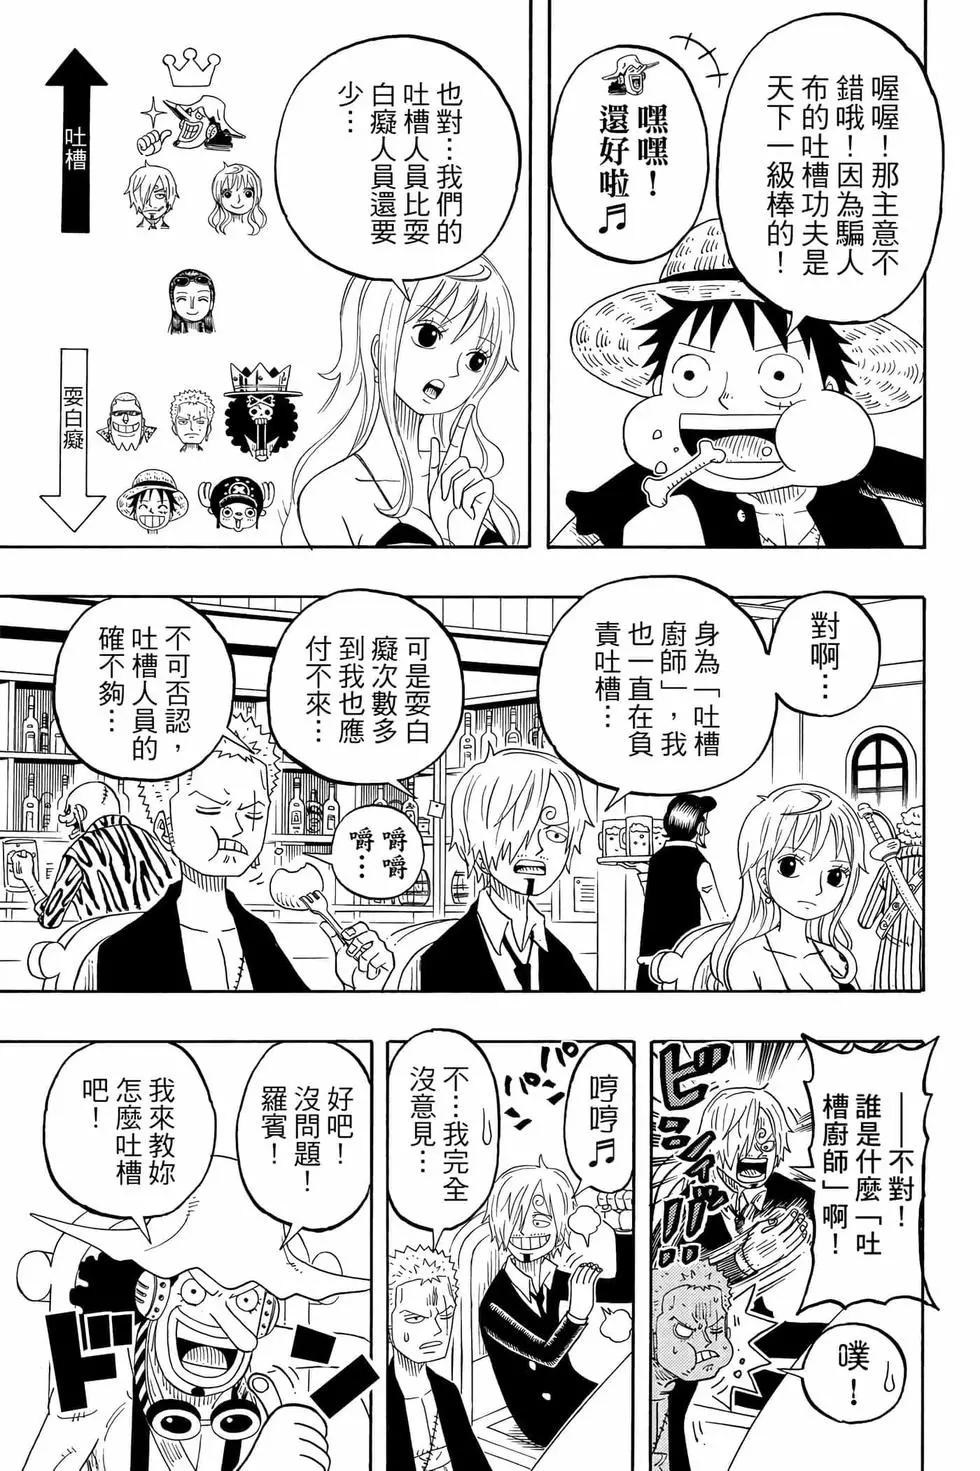 One piece party - 第04卷(1/4) - 2